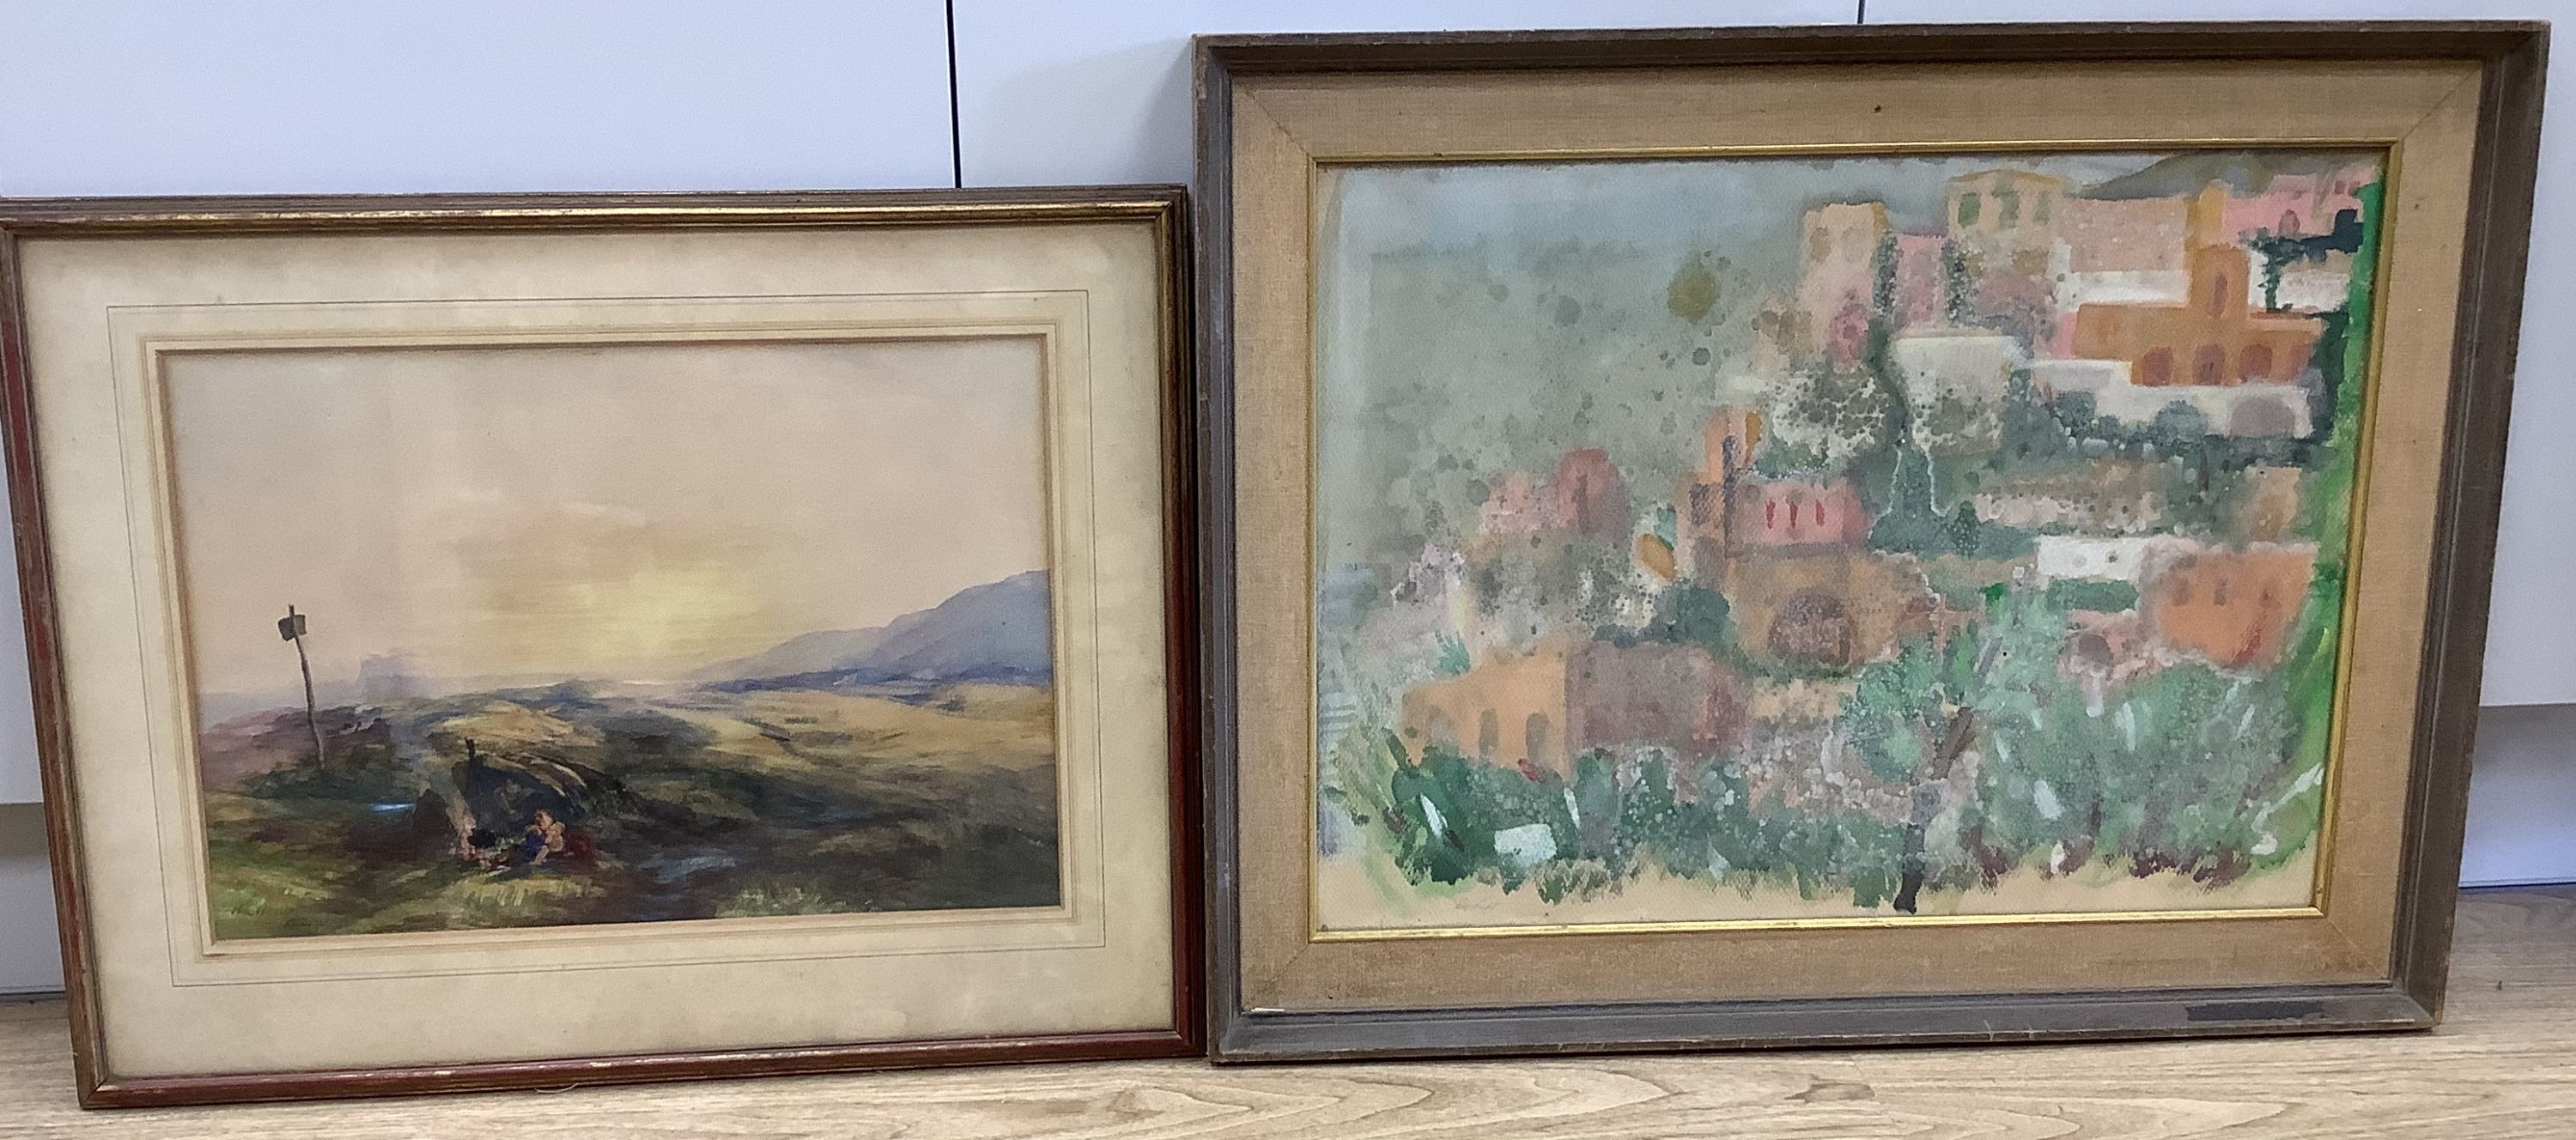 Evelyn Licht, watercolour, Hillside town, signed, 45 x 60cm and a watercolour landscape by H.C.